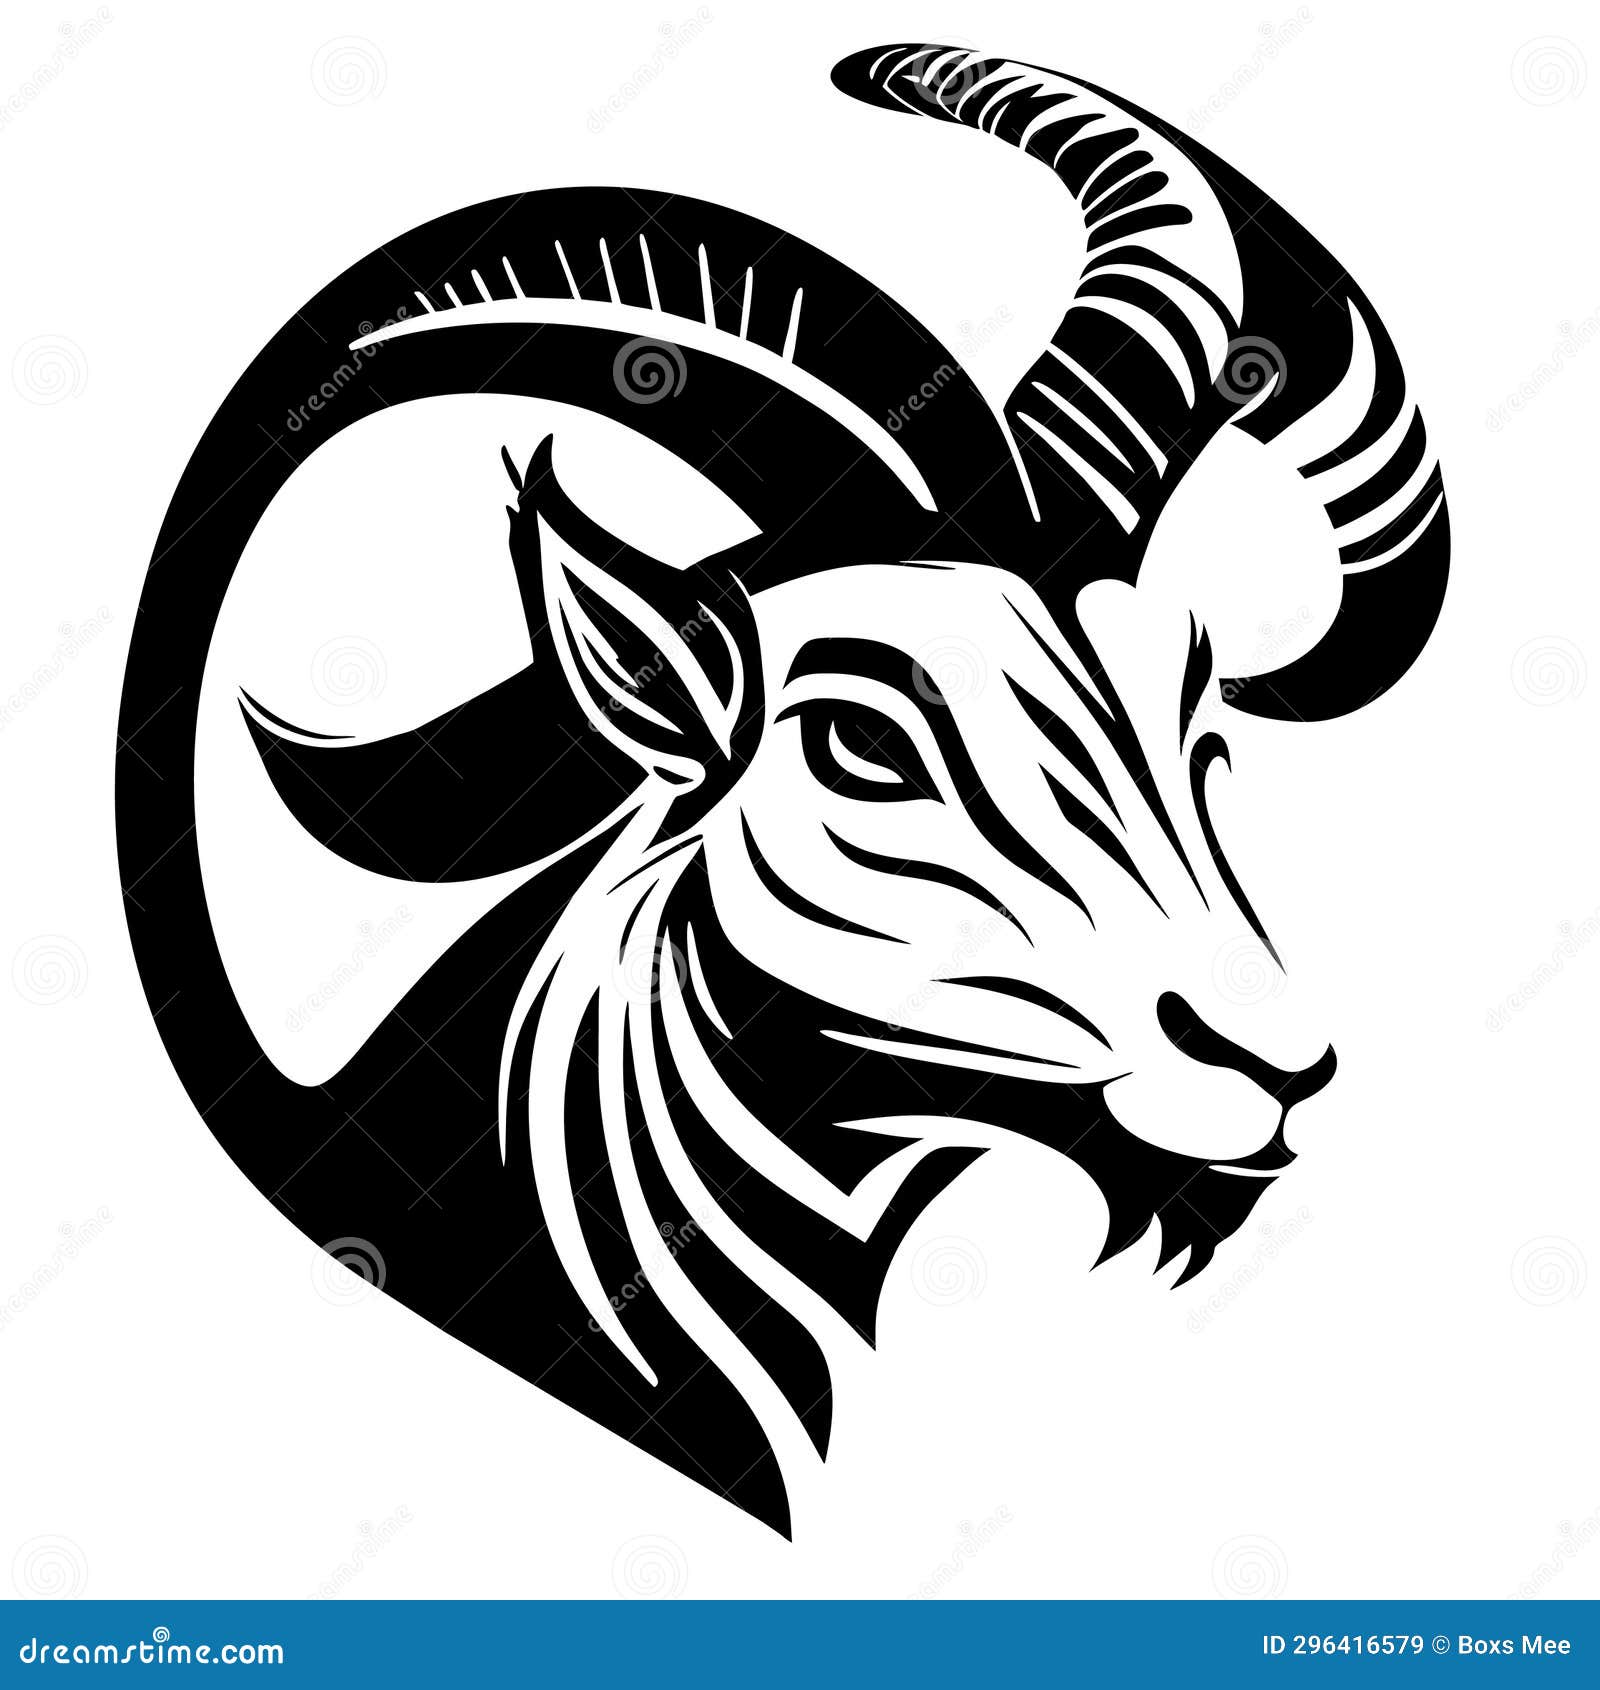 Goat Head - Black and White Vector Illustration - Isolated on White AI ...